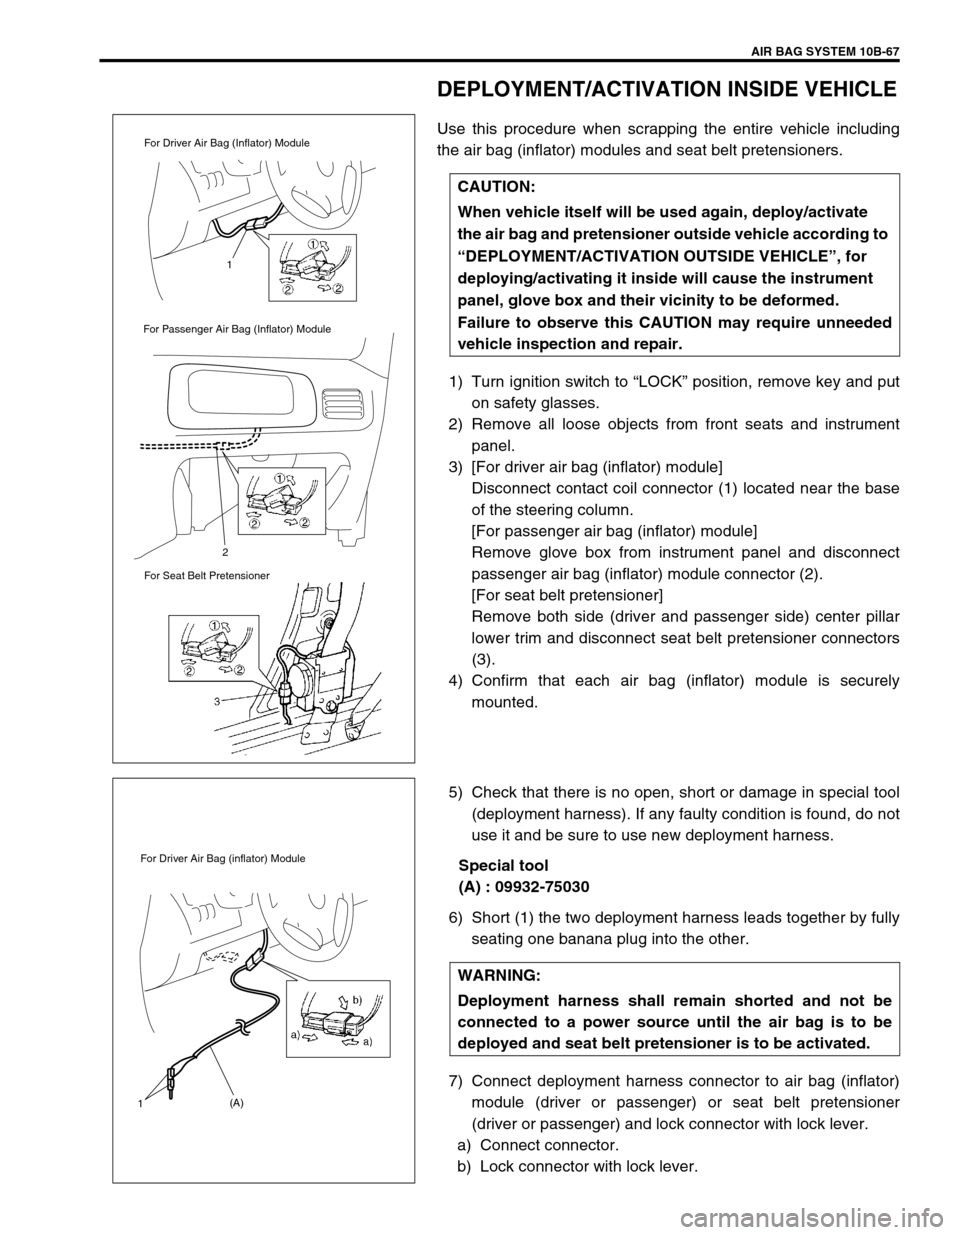 SUZUKI SWIFT 2000 1.G Transmission Service Workshop Manual AIR BAG SYSTEM 10B-67
DEPLOYMENT/ACTIVATION INSIDE VEHICLE
Use this procedure when scrapping the entire vehicle including
the air bag (inflator) modules and seat belt pretensioners.
1) Turn ignition s